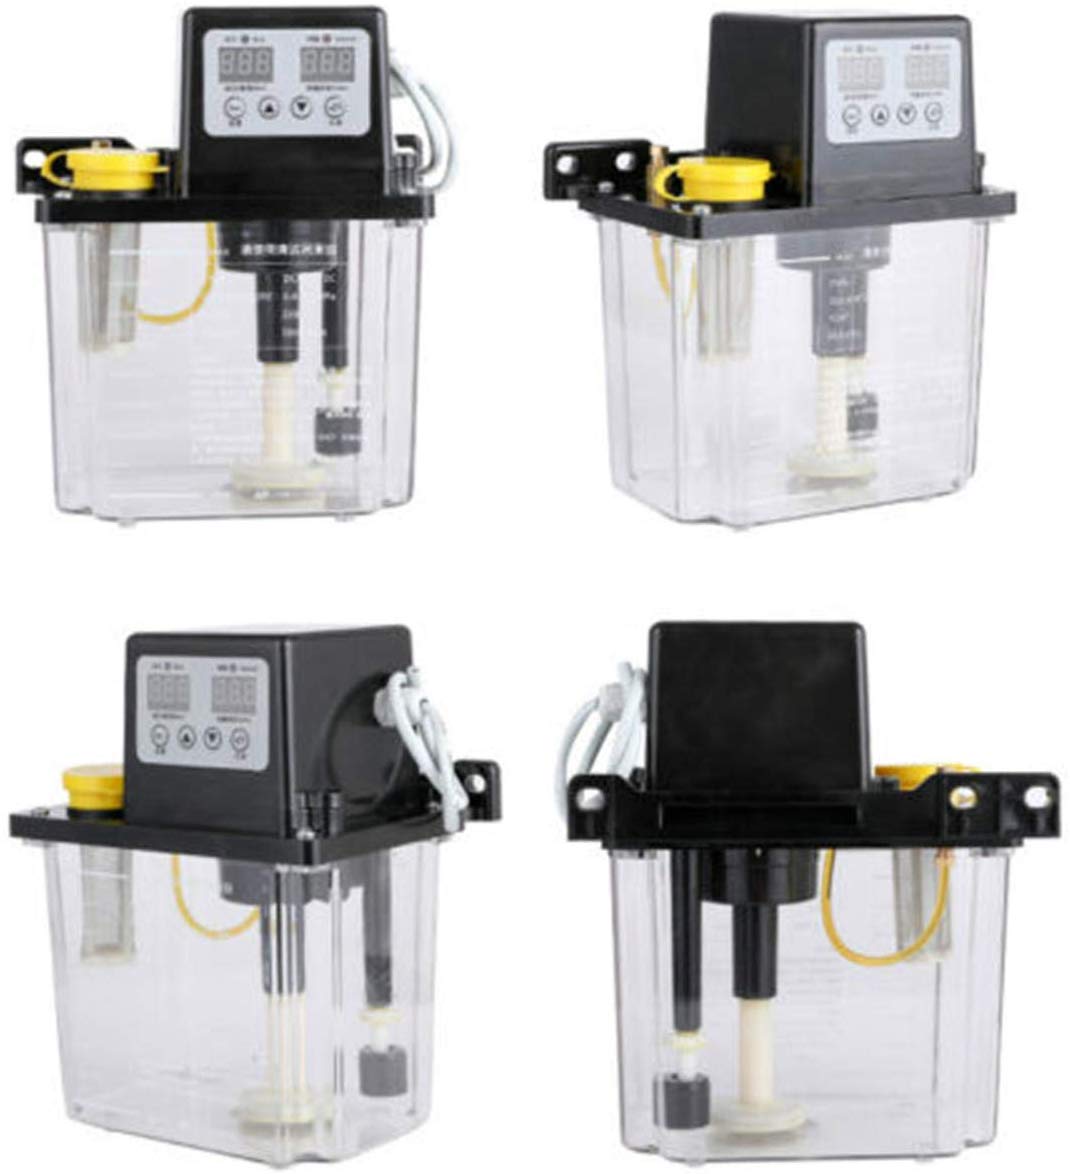 Automatic Electric Lubrication Oil Pump with Dual Digital Display 1L/2L 110V